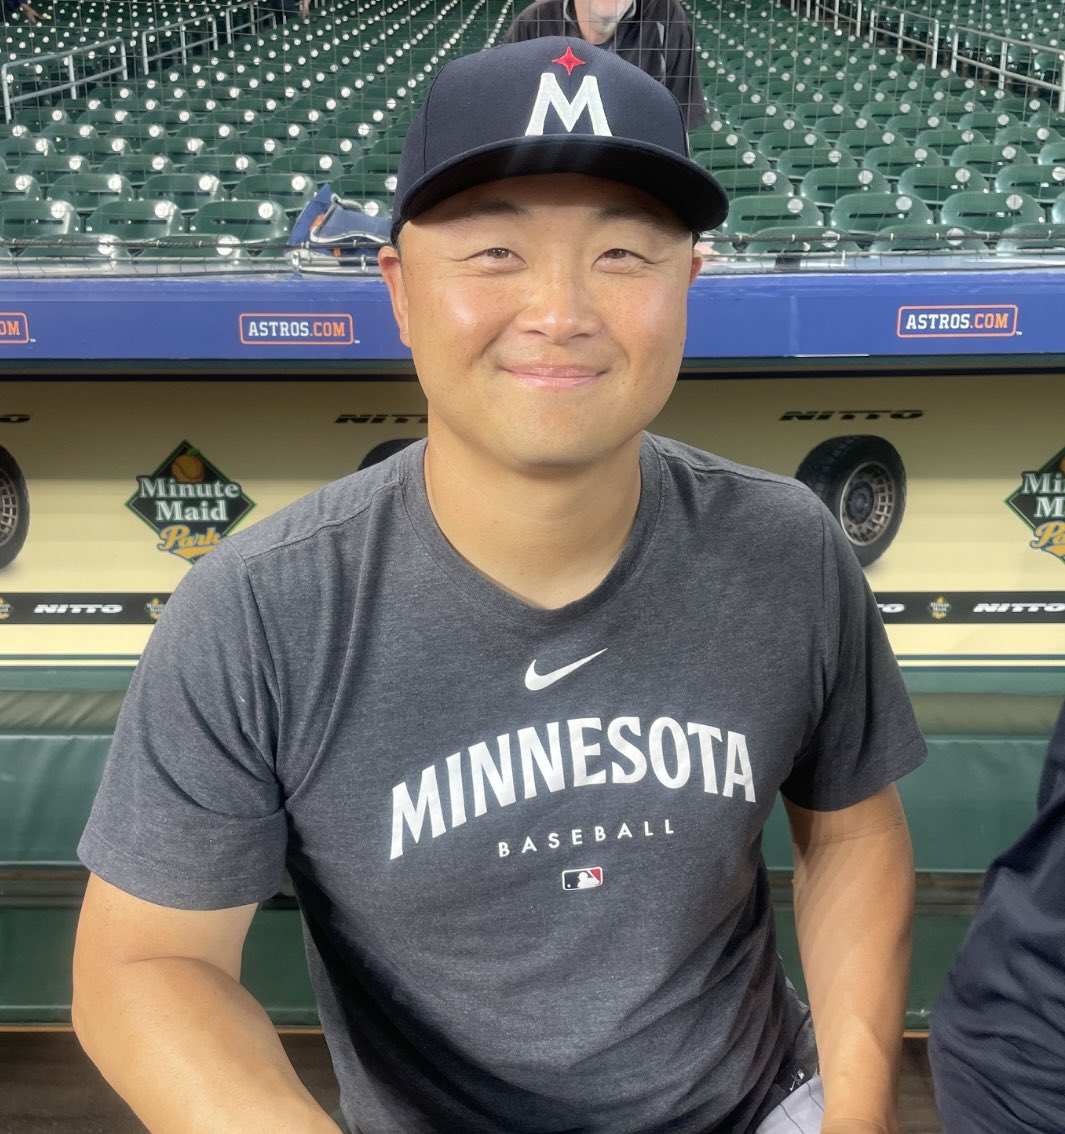 Former Astros catcher Hank Conger (2015), who’s now the Twins first base/catching coach. One of the funniest guys I’ve ever covered.